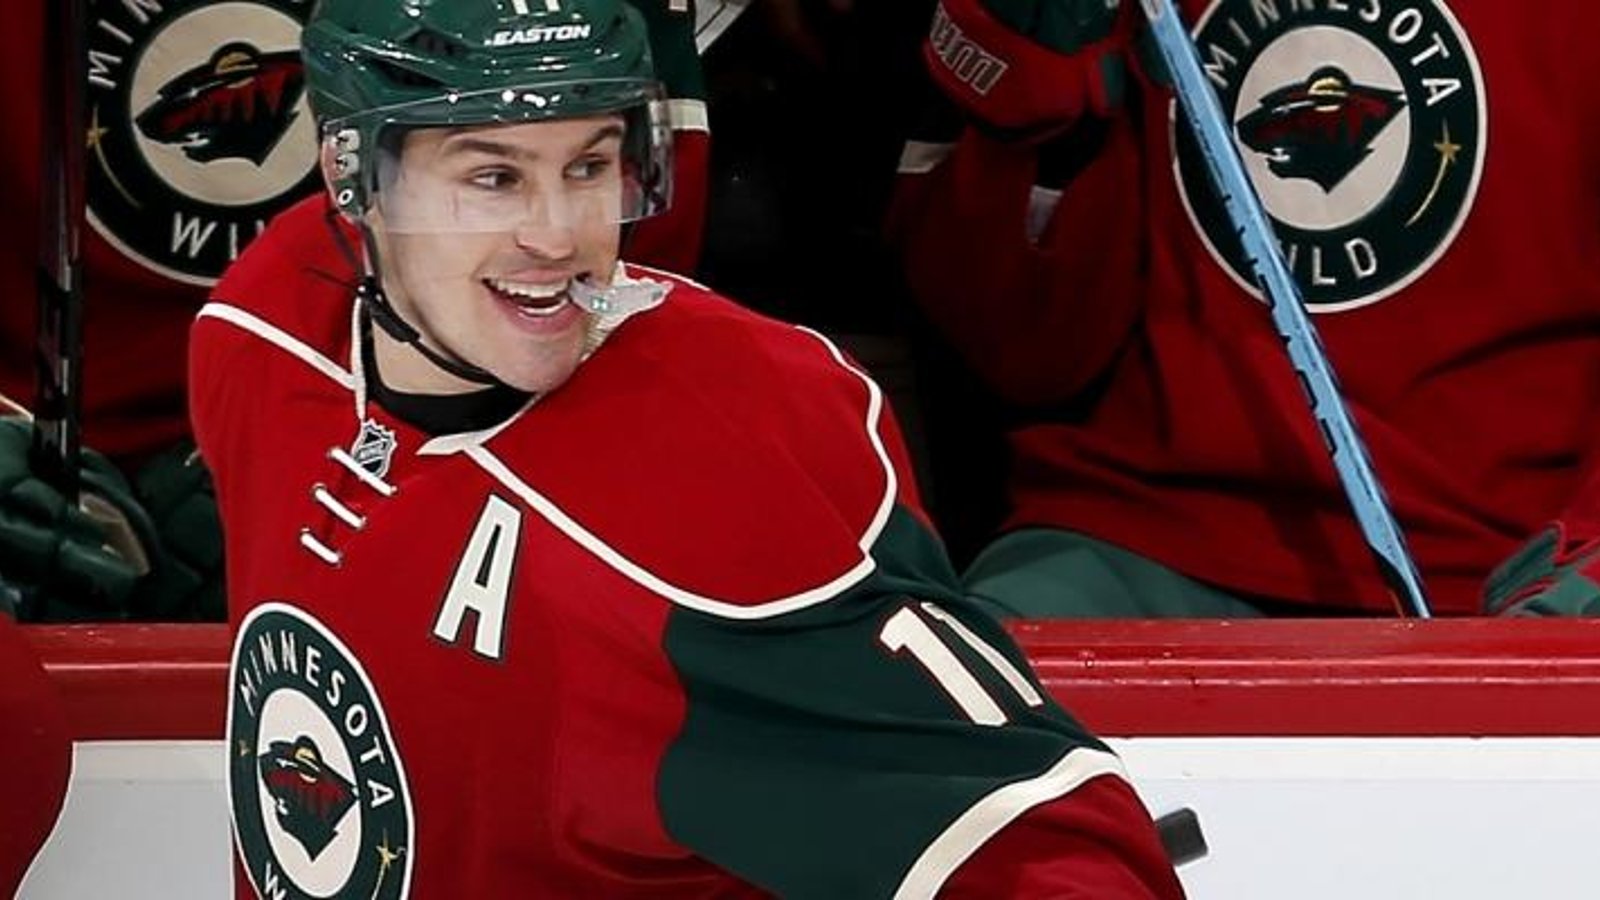 Wild star reportedly played major role in bringing Eric Stall to Minnesota.